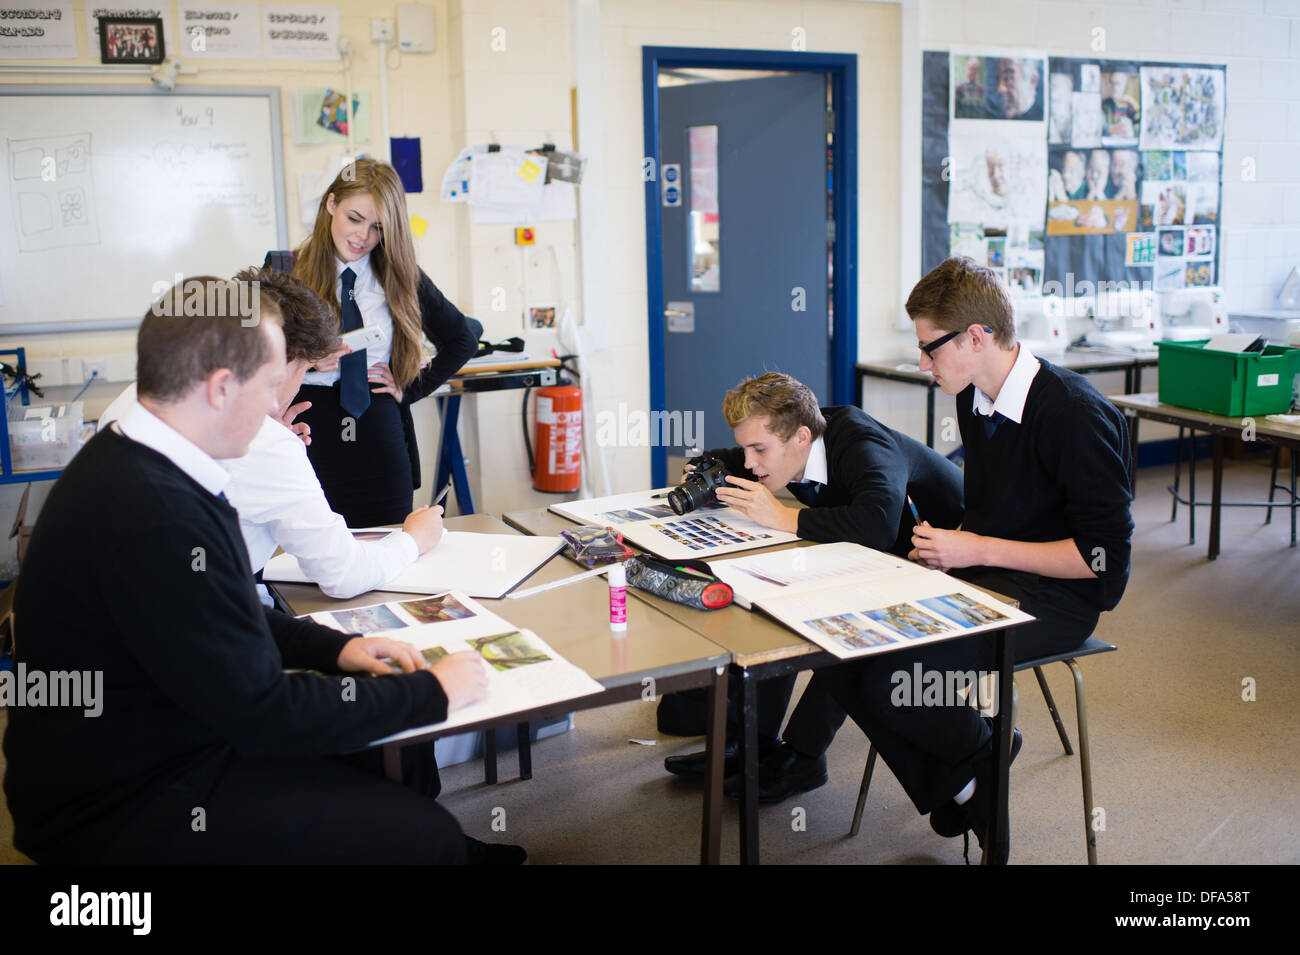 Year 12 6th form pupils students in a A level art photography class, Secondary school, Wales UK Stock Photo